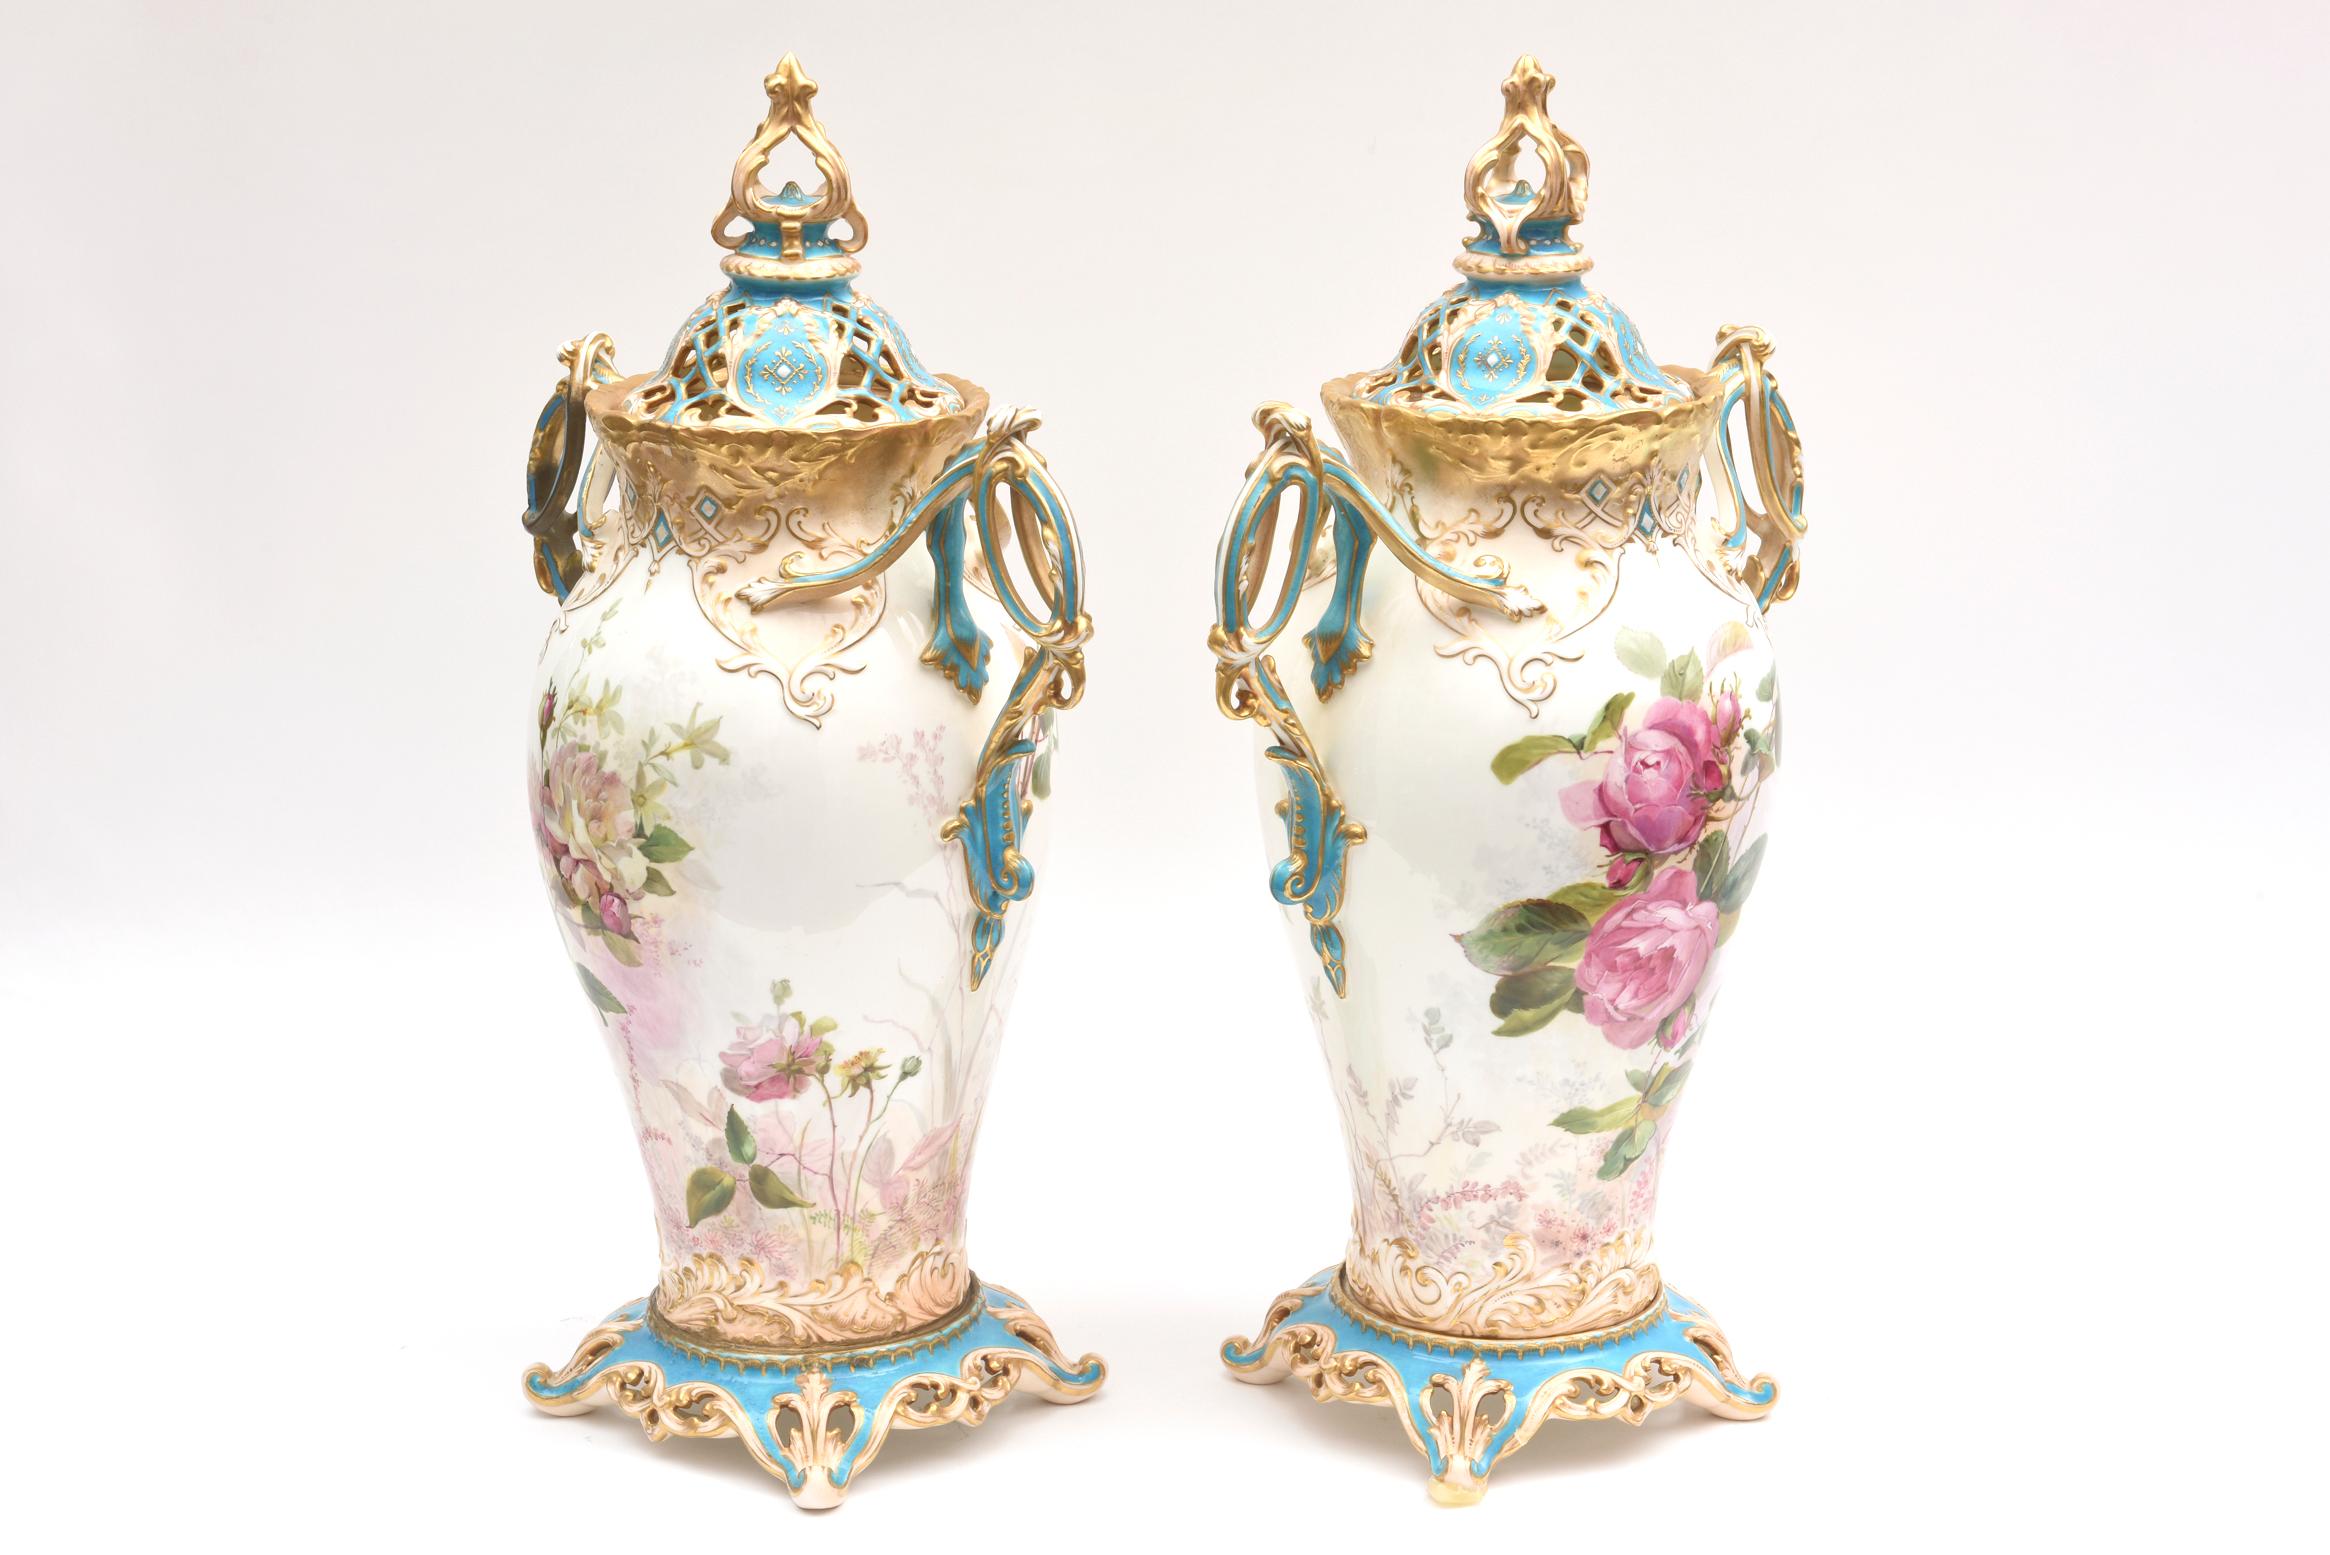 An outstanding and hard to find pair of antique porcelain vases with their original lids. Finely painted and Artist-signed roses and flora fauna surround the detailed body of the vases. Bright and colorful turquoise hand enameling accent throughout